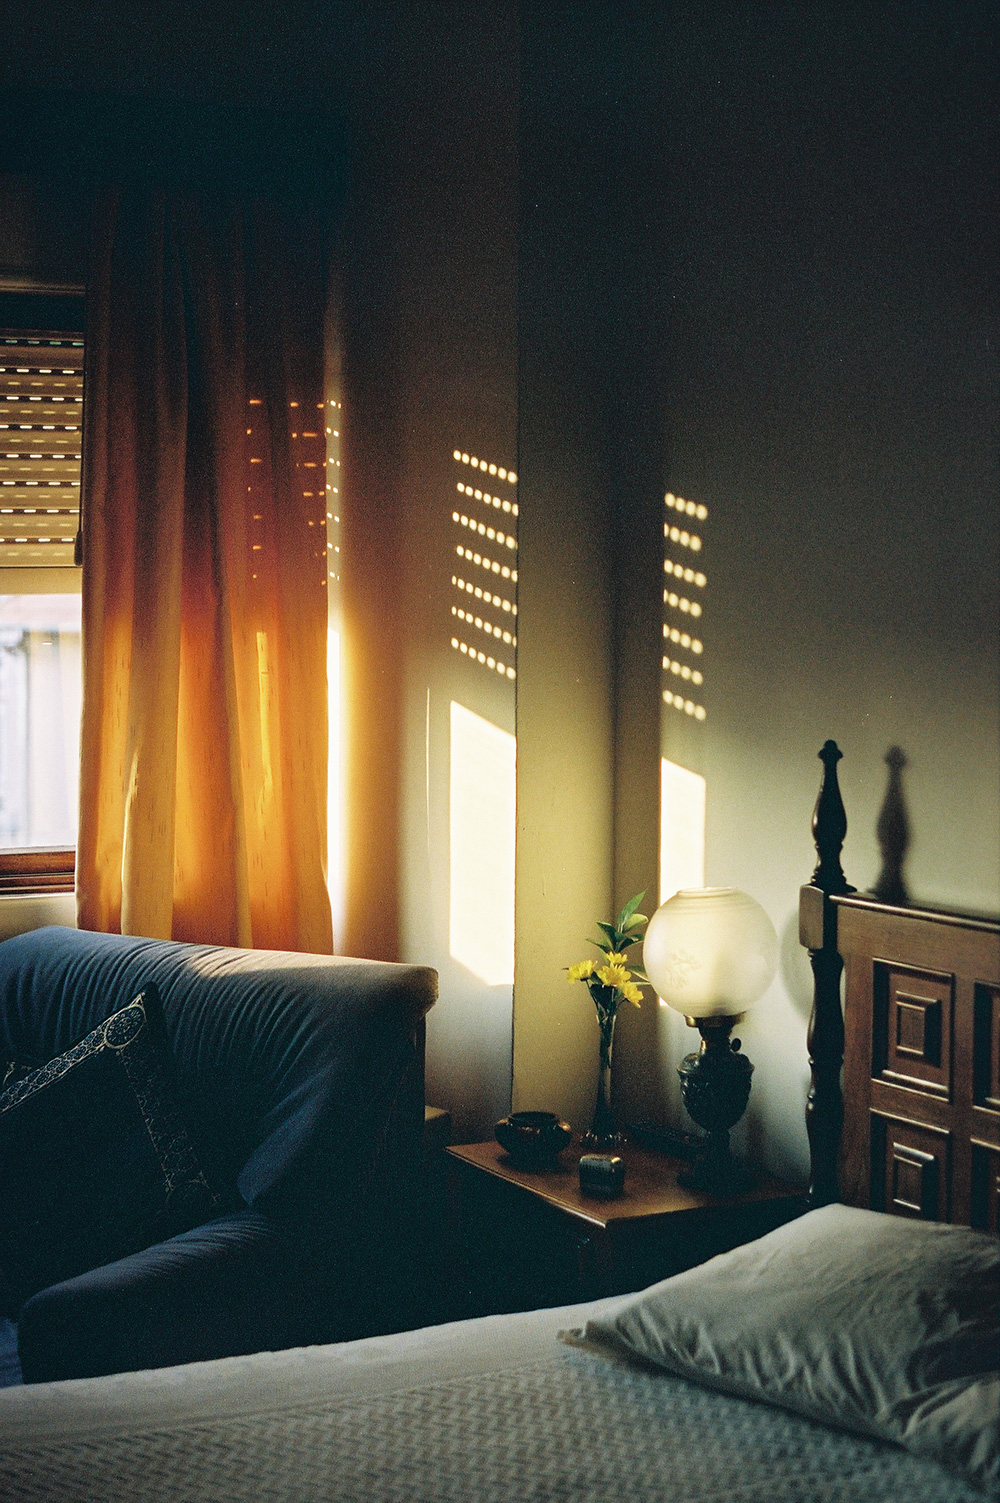 Analog photo of a bedroom, light shining through a window on the left.